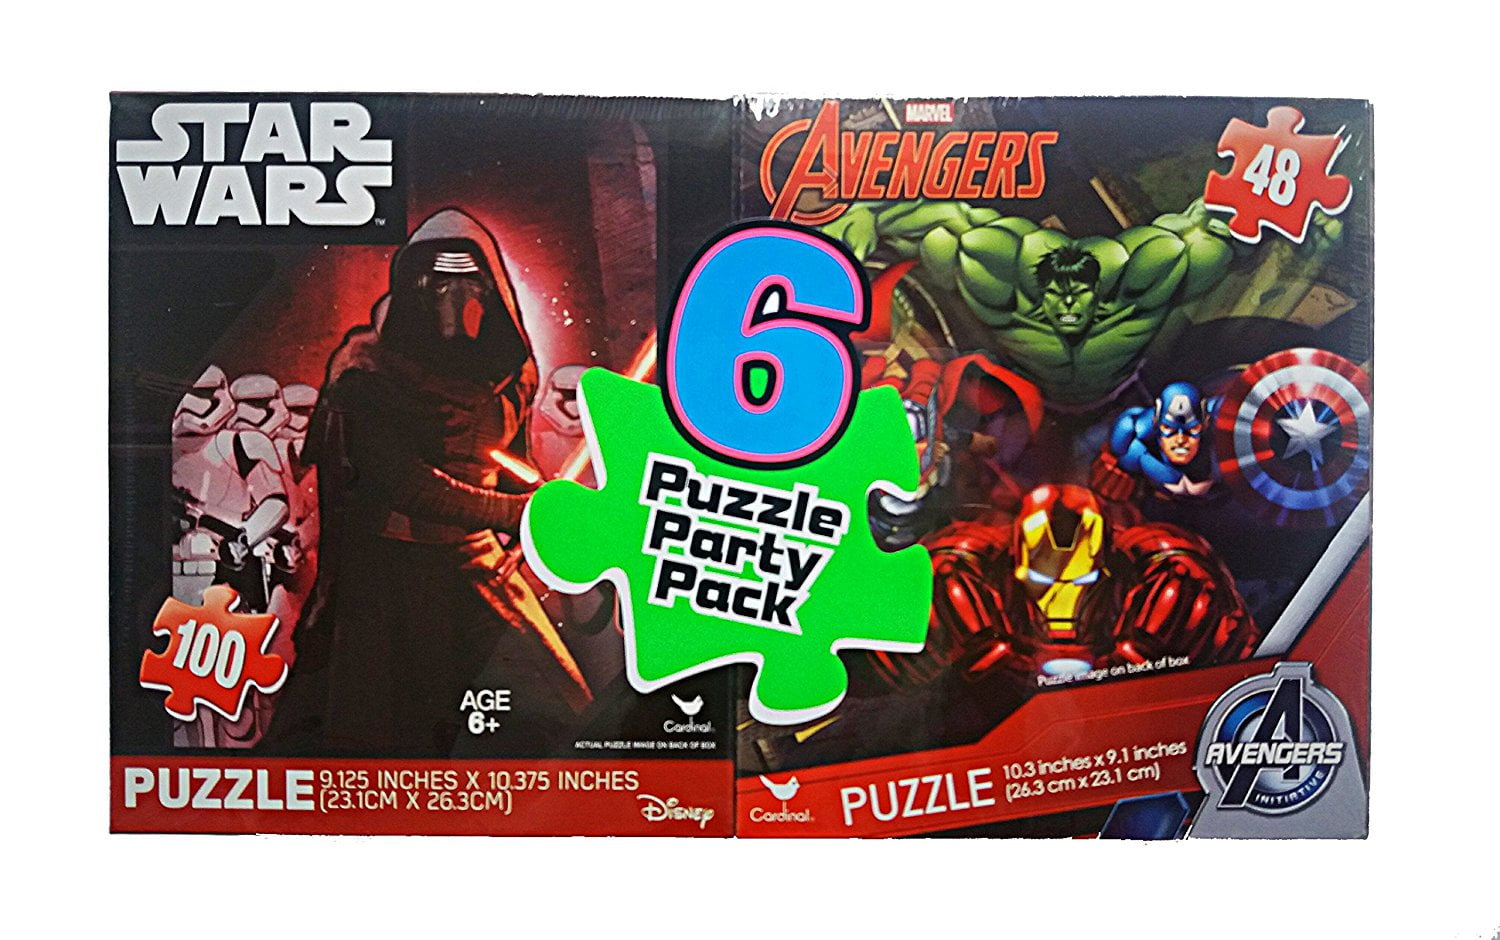 Puzzles Boxes Vary Spiderman Avengers Infinity War Gift Set Bundle 3 Collectible Girls/Boys 100 Piece Jigsaw Puzzles in Boxes: Jurassic World